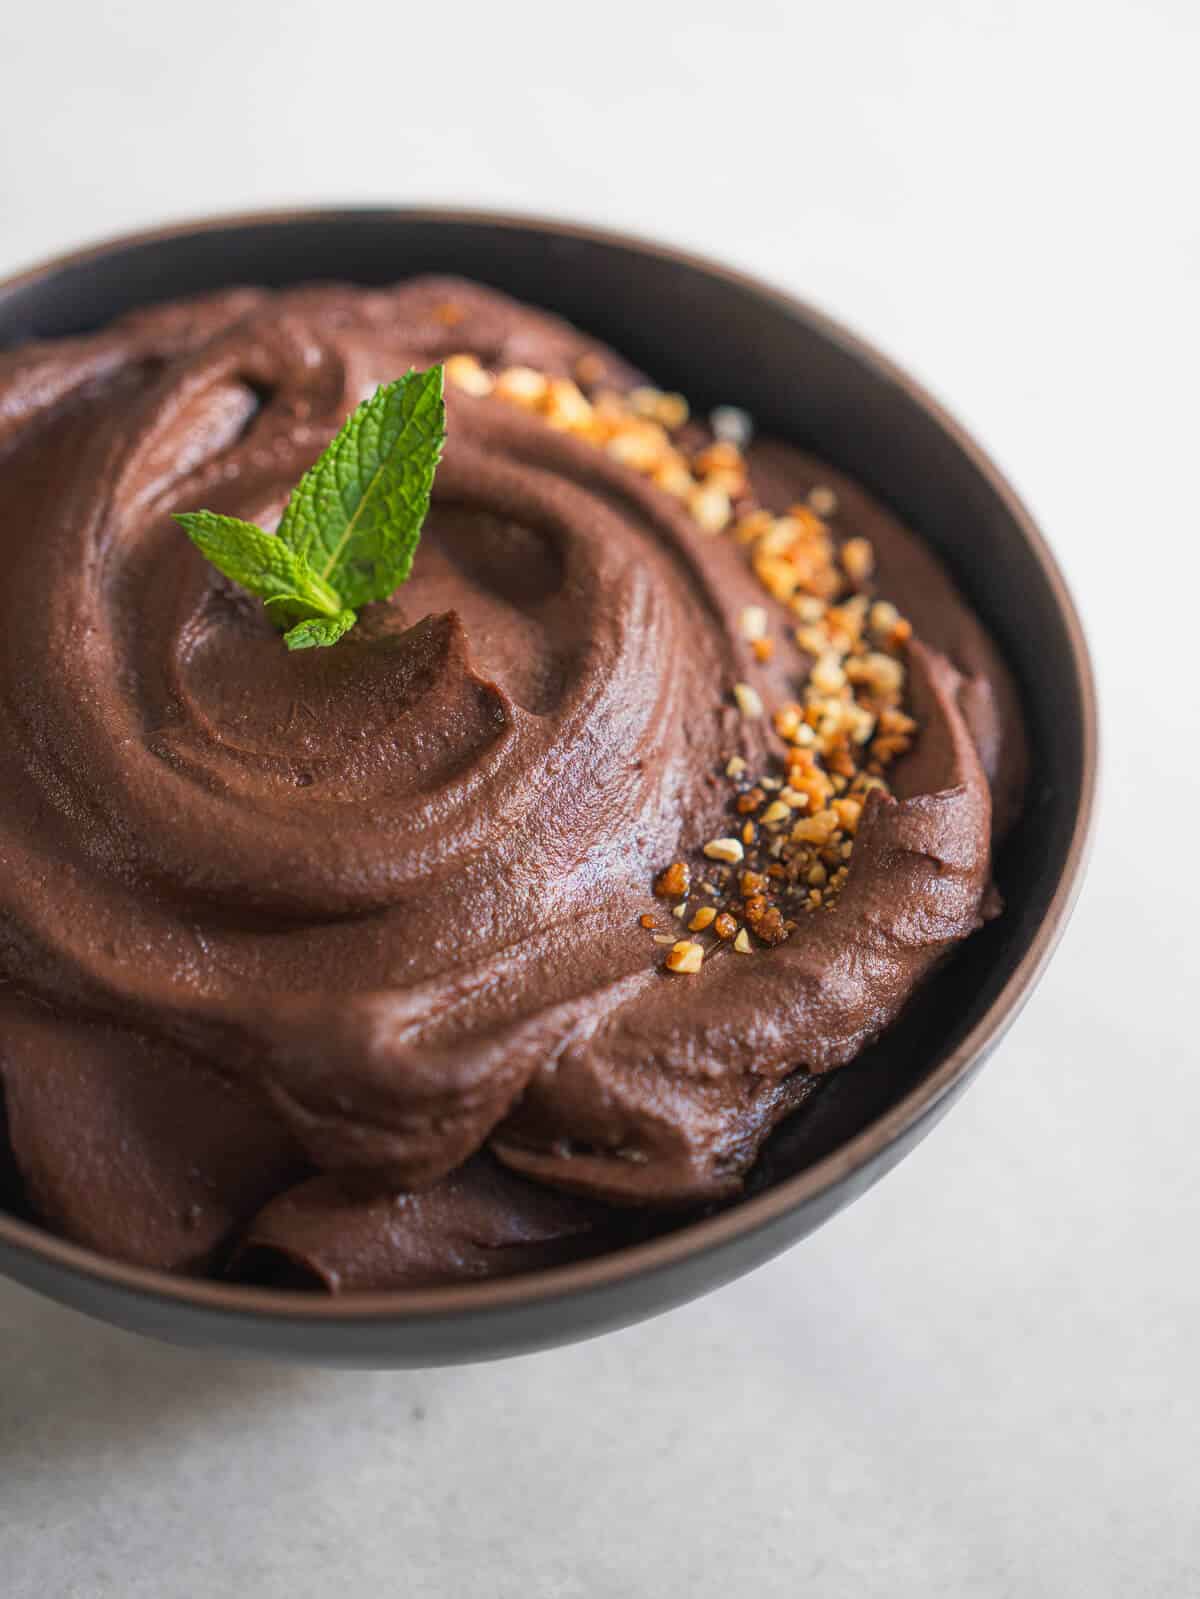 dark chocolate hummus with crushed almonds and mint leaves.